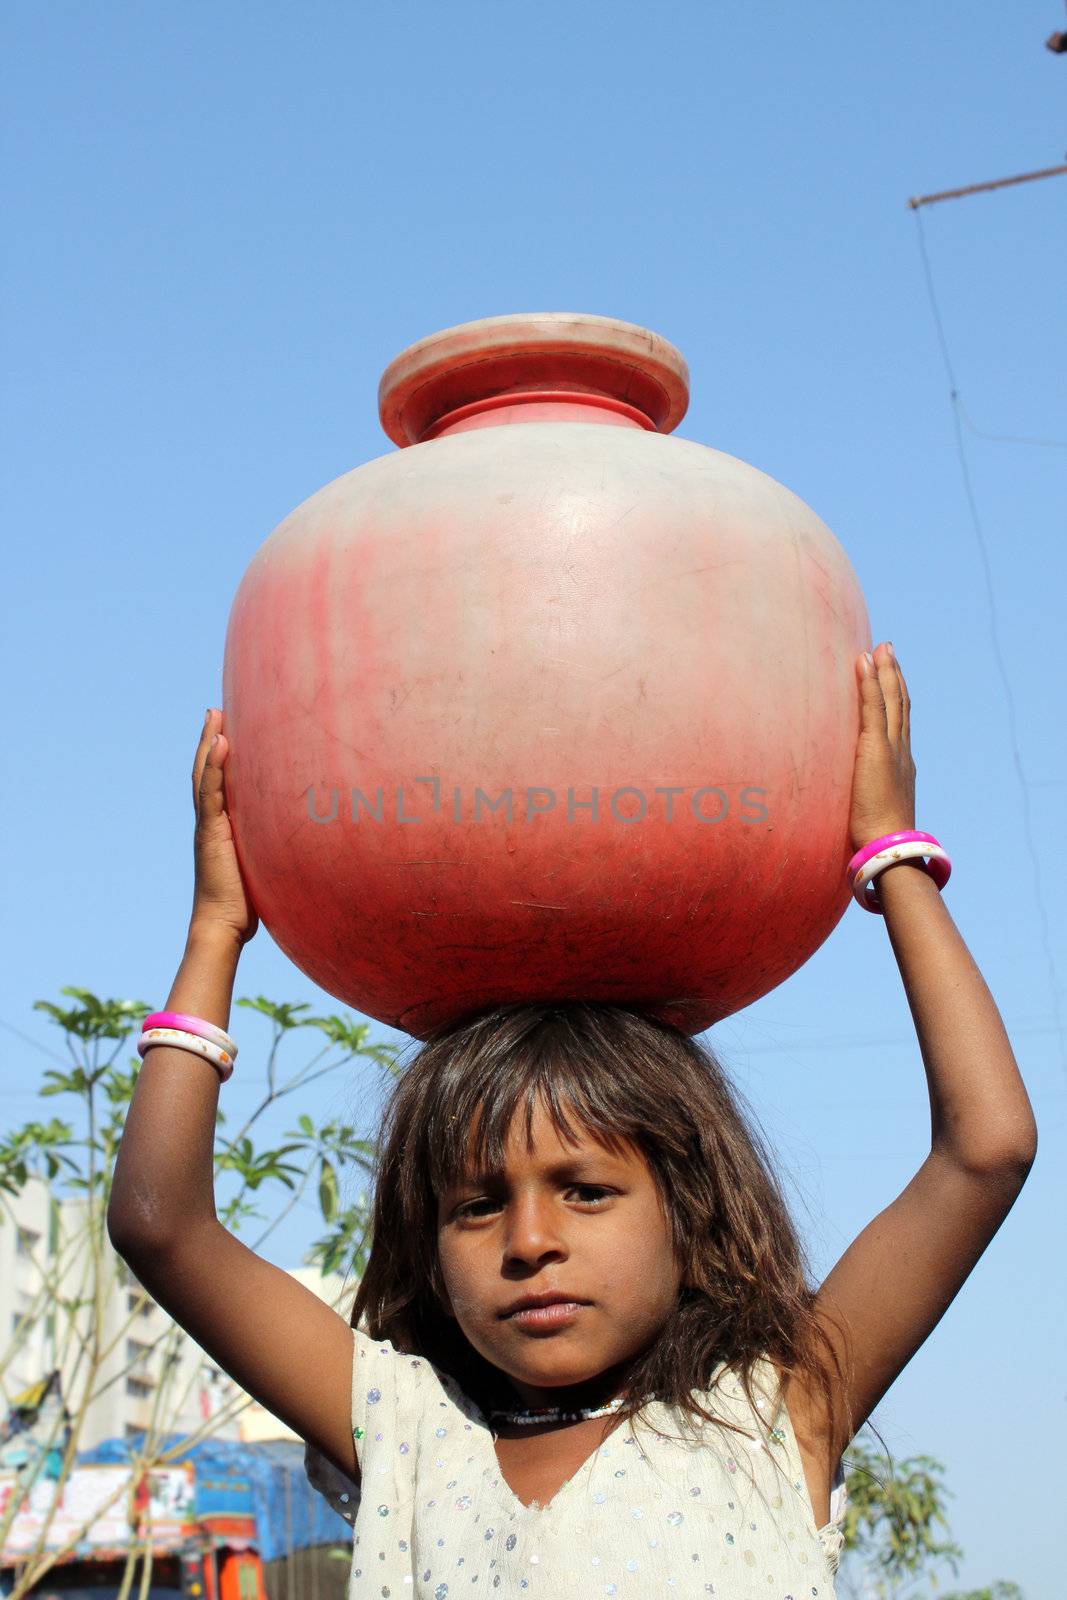 A poor Indian girl carrying water to her home in a red plastic pot, due to scarcity of drinking water to poor people in India.